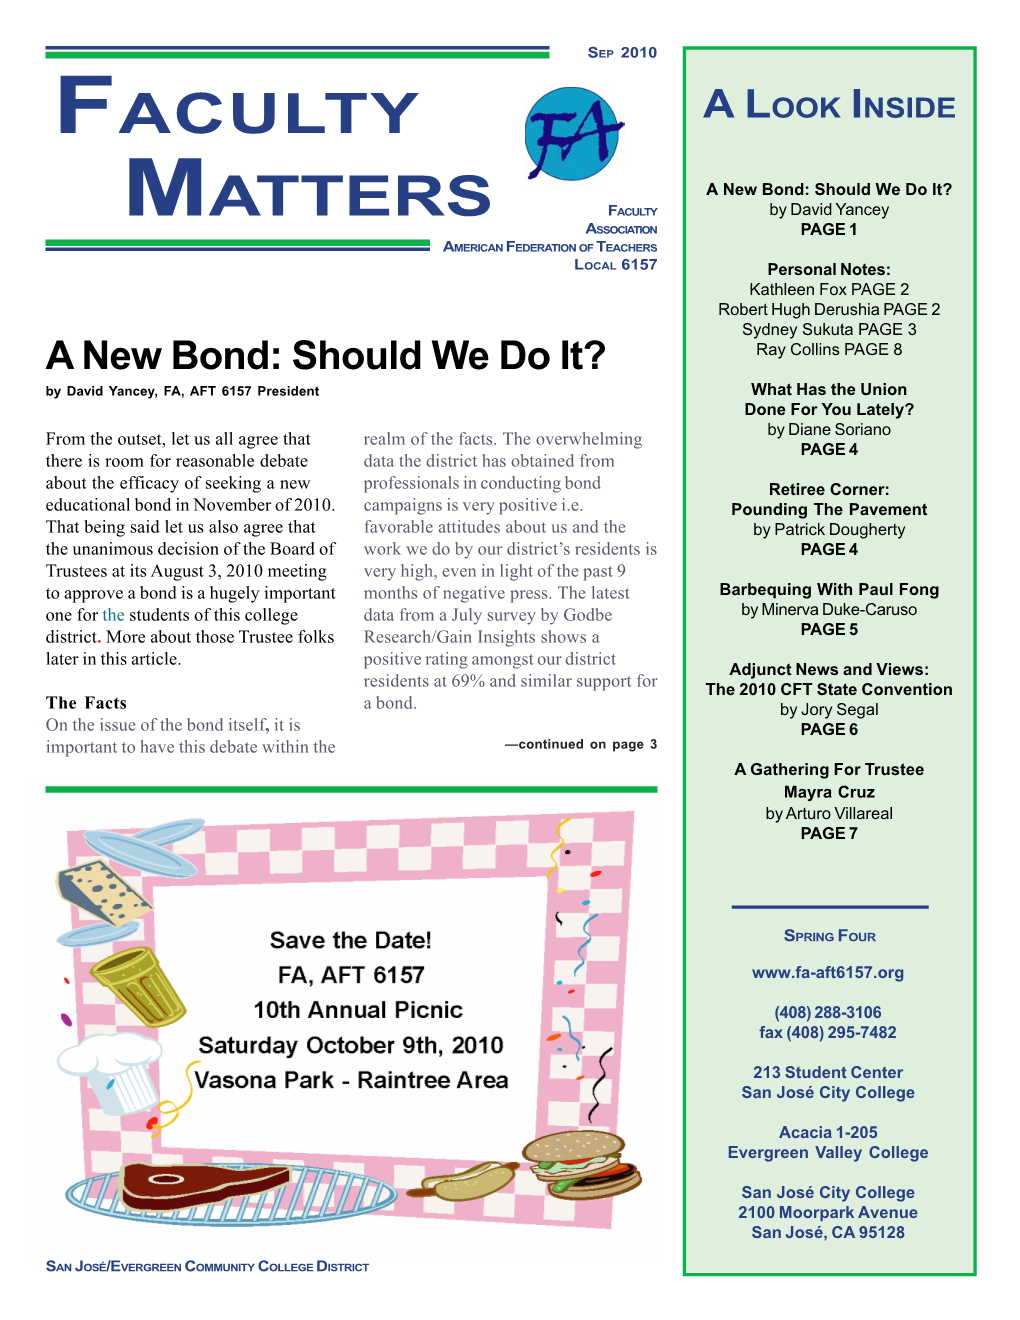 FACULTY MATTERS ♦ SEP 2010 Personal Notes